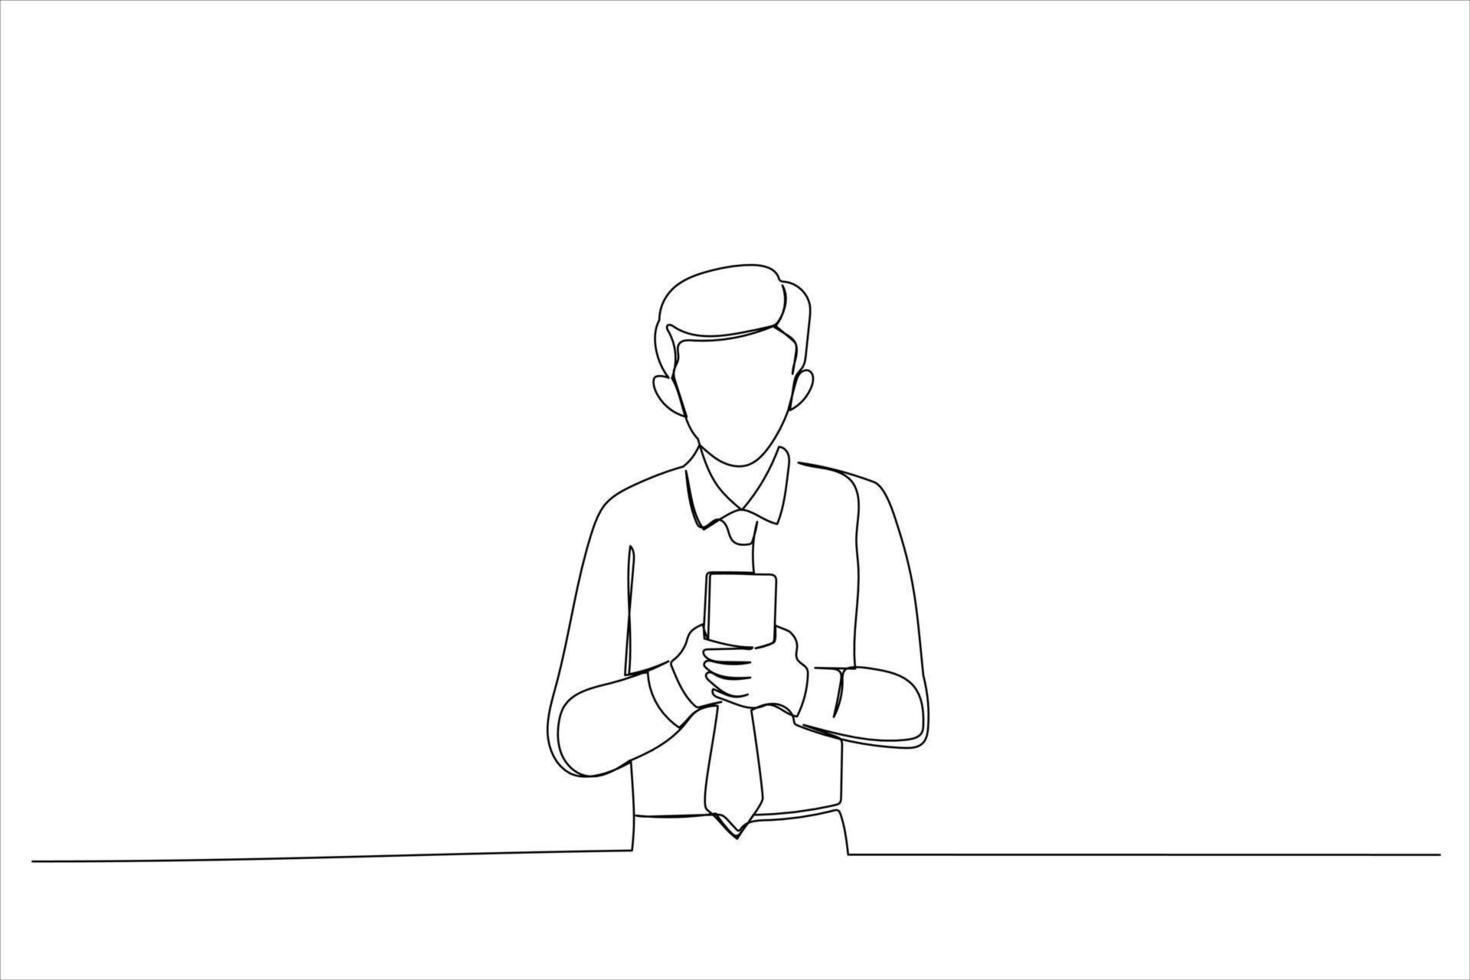 Drawing of young man using his phone while standing. Single continuous line art vector